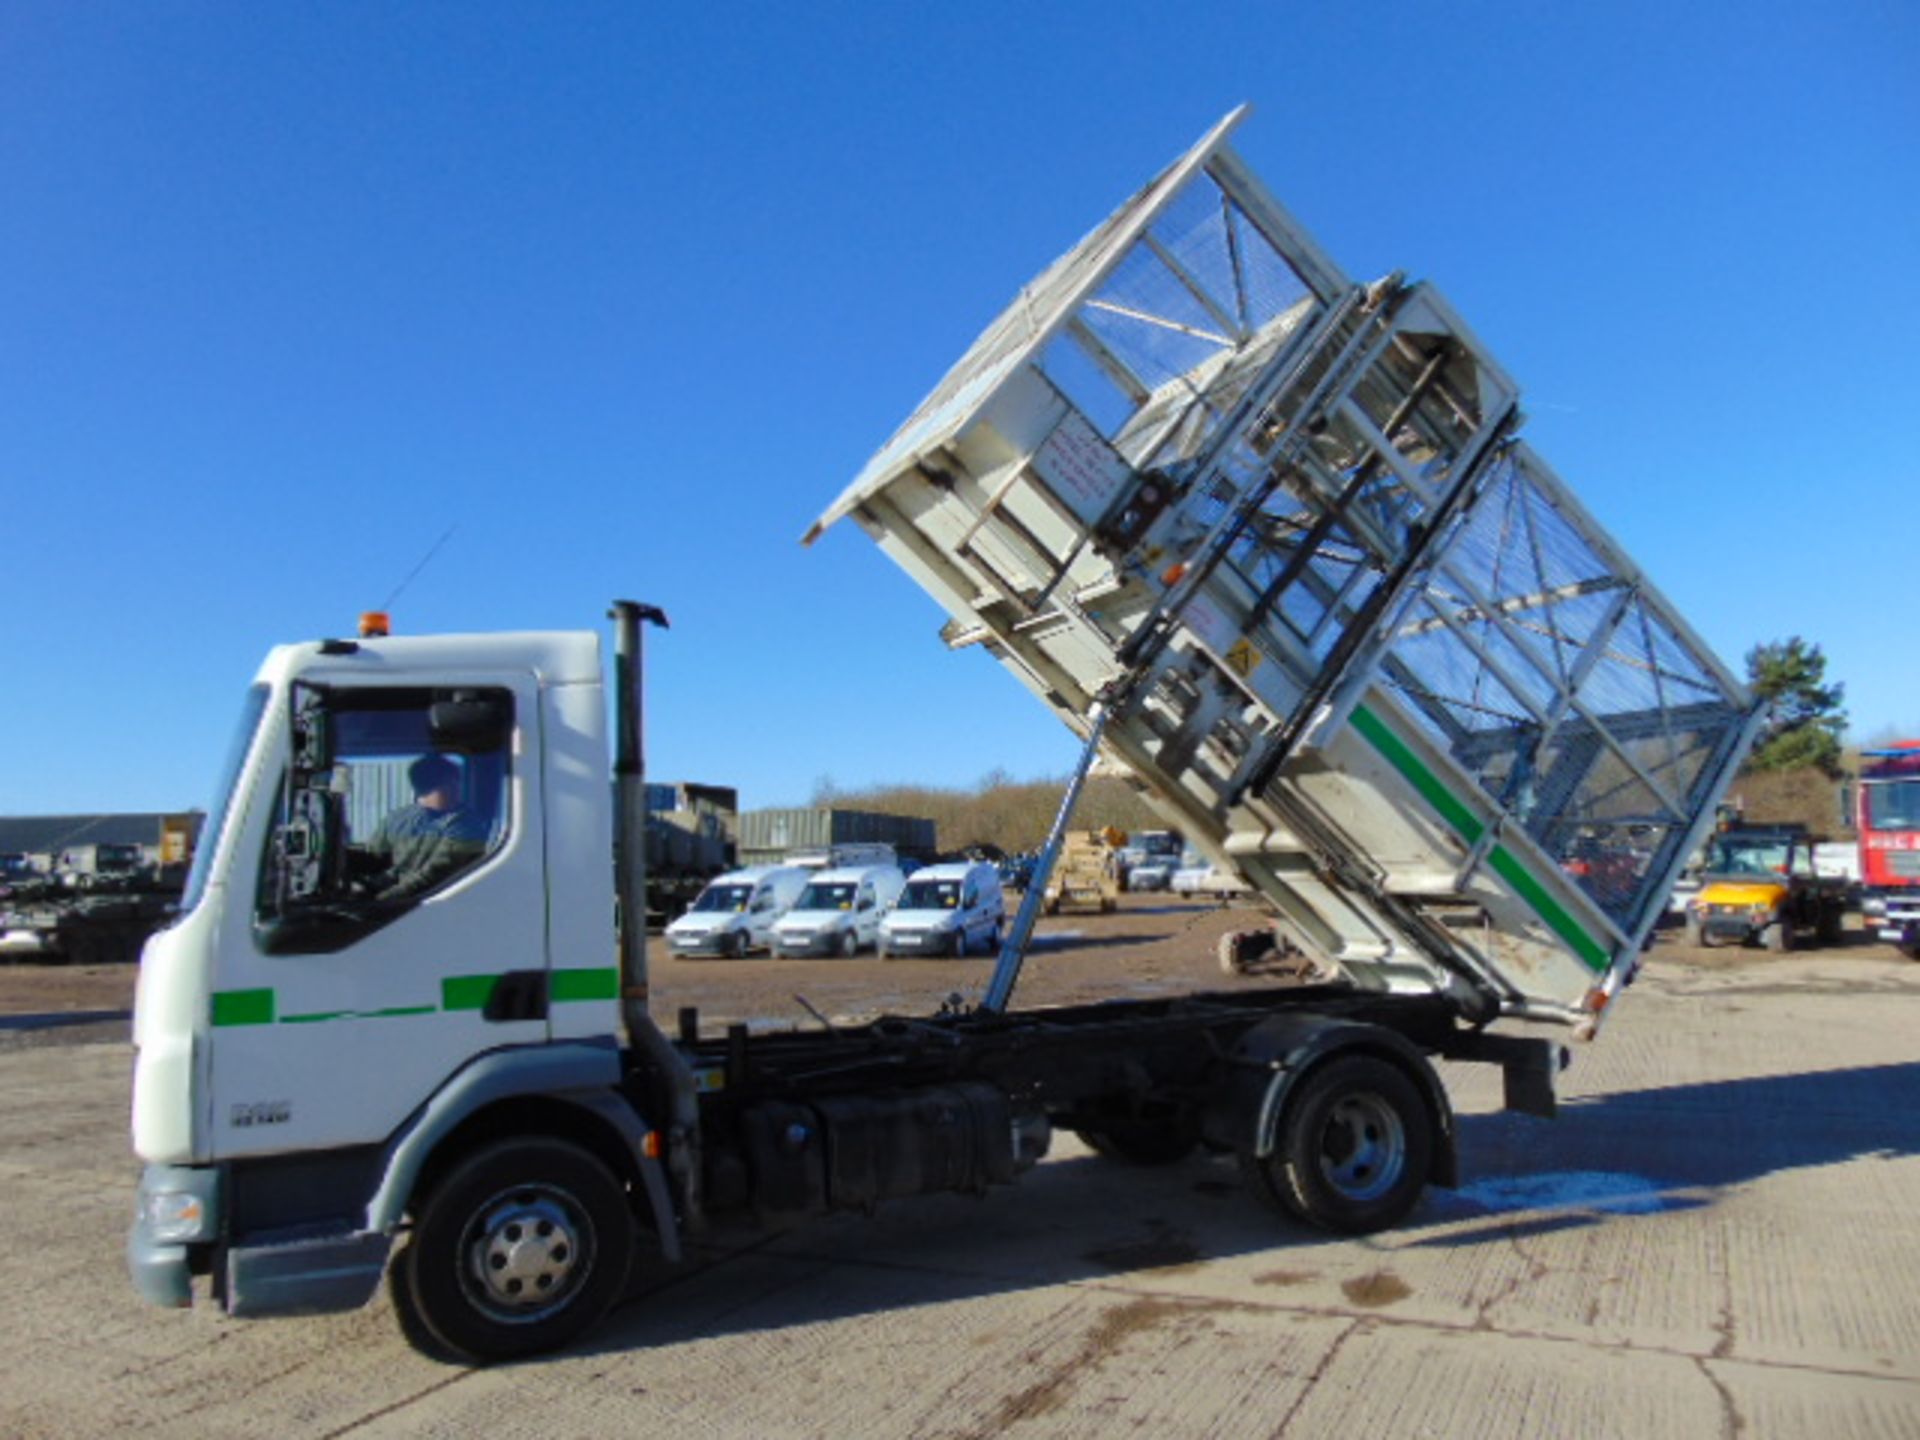 2008 DAF LF 45.140 C/W Refuse Cage, Rear Tipping Body and Side Bin Lift - Image 9 of 26